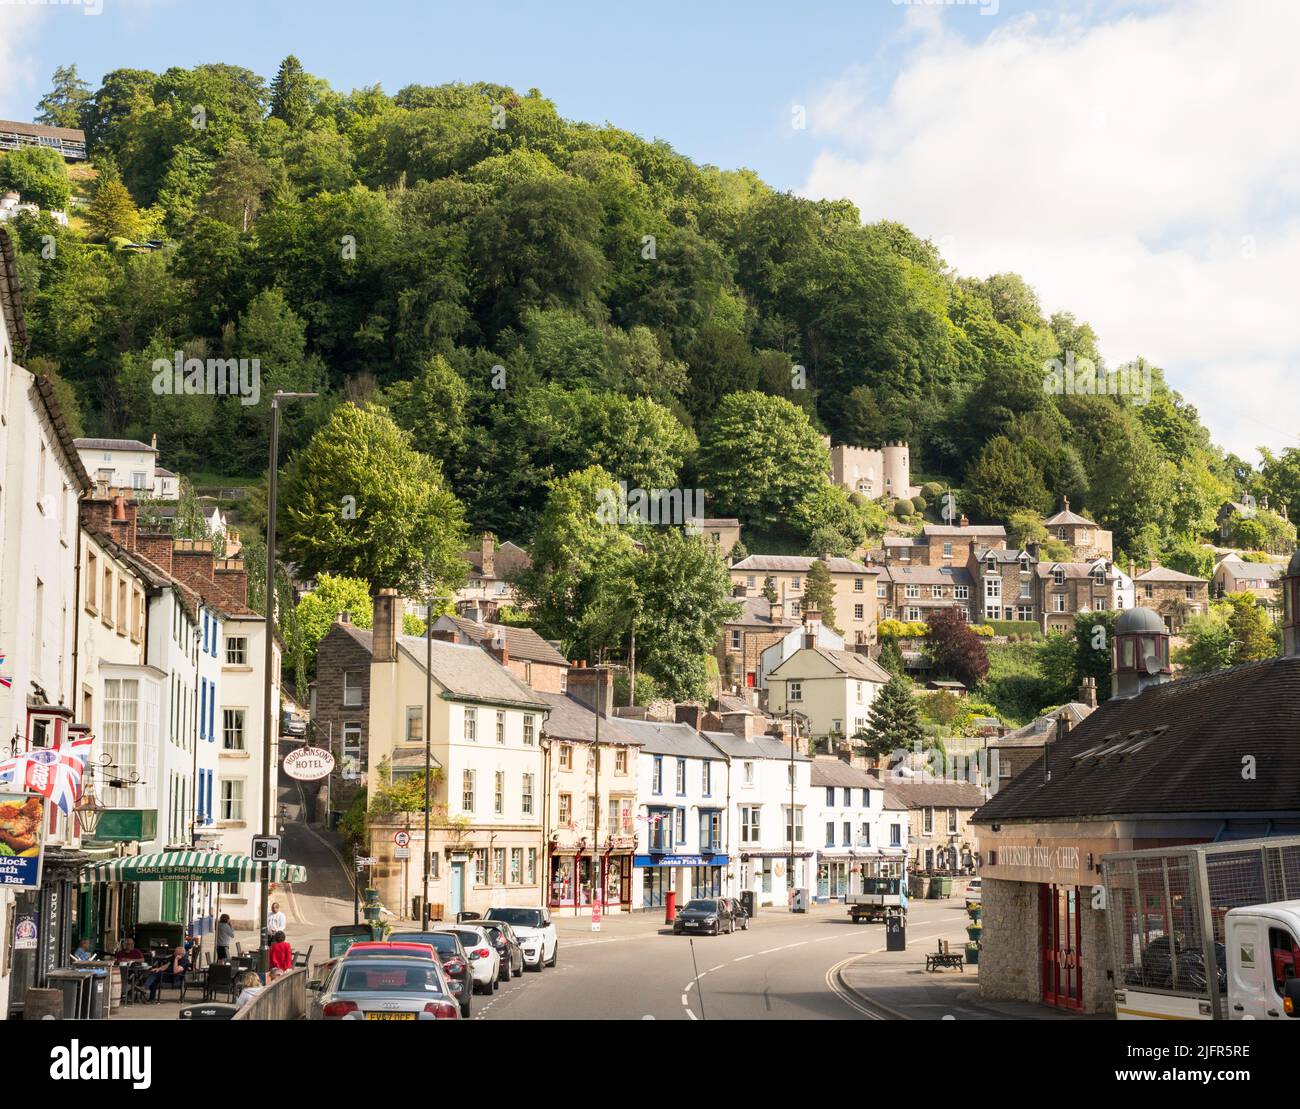 Shops, restaurants and pubs in South Parade, Matlock Bath, Derbyshire, England, UK Stock Photo